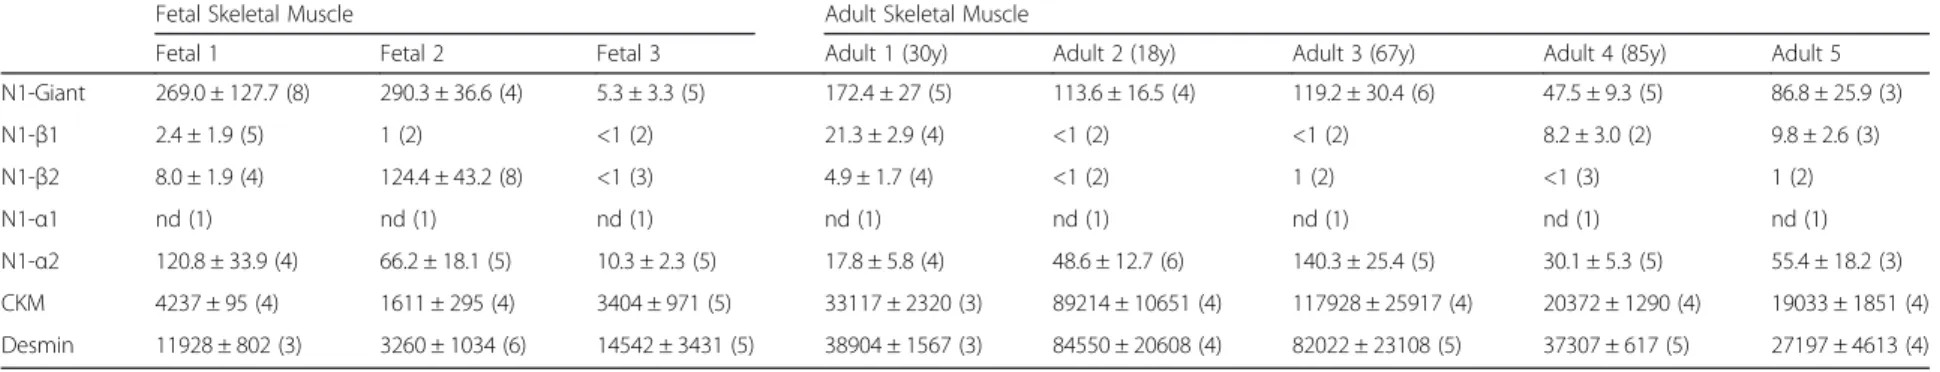 Table 4 Relative expression of mRNA of nesprin-1 isoforms and markers of differentiation in normal human skeletal muscle